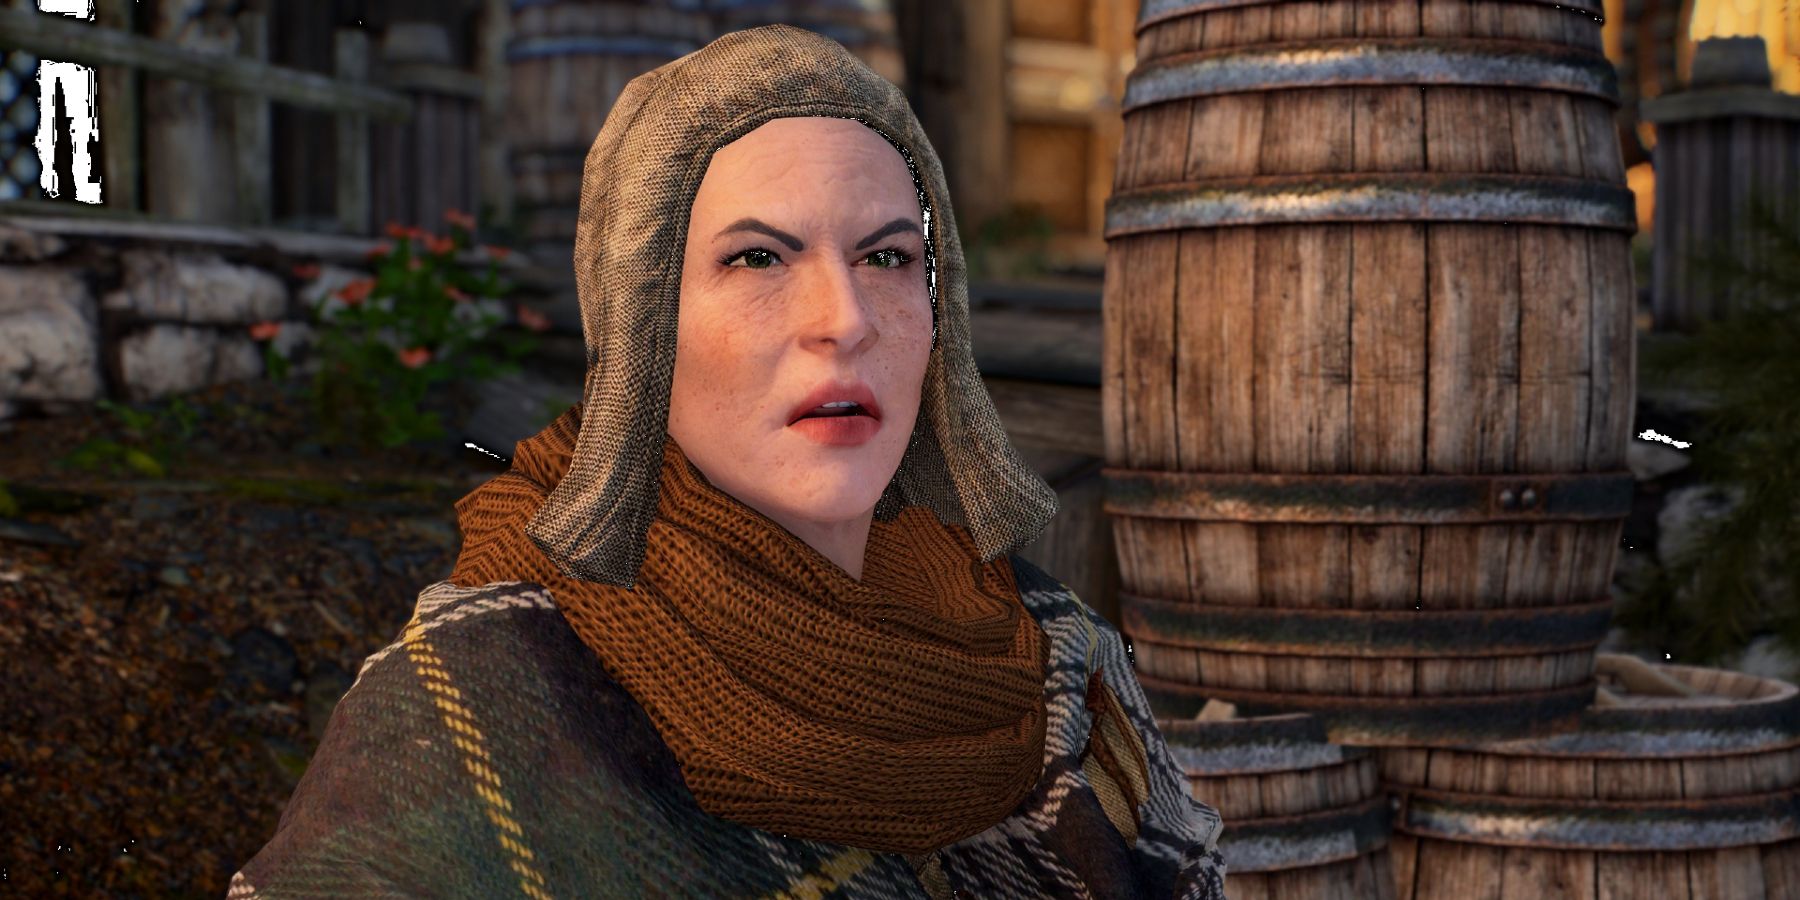 Screenshot from Skyrim showing a female NPC looking a little angry at the player.